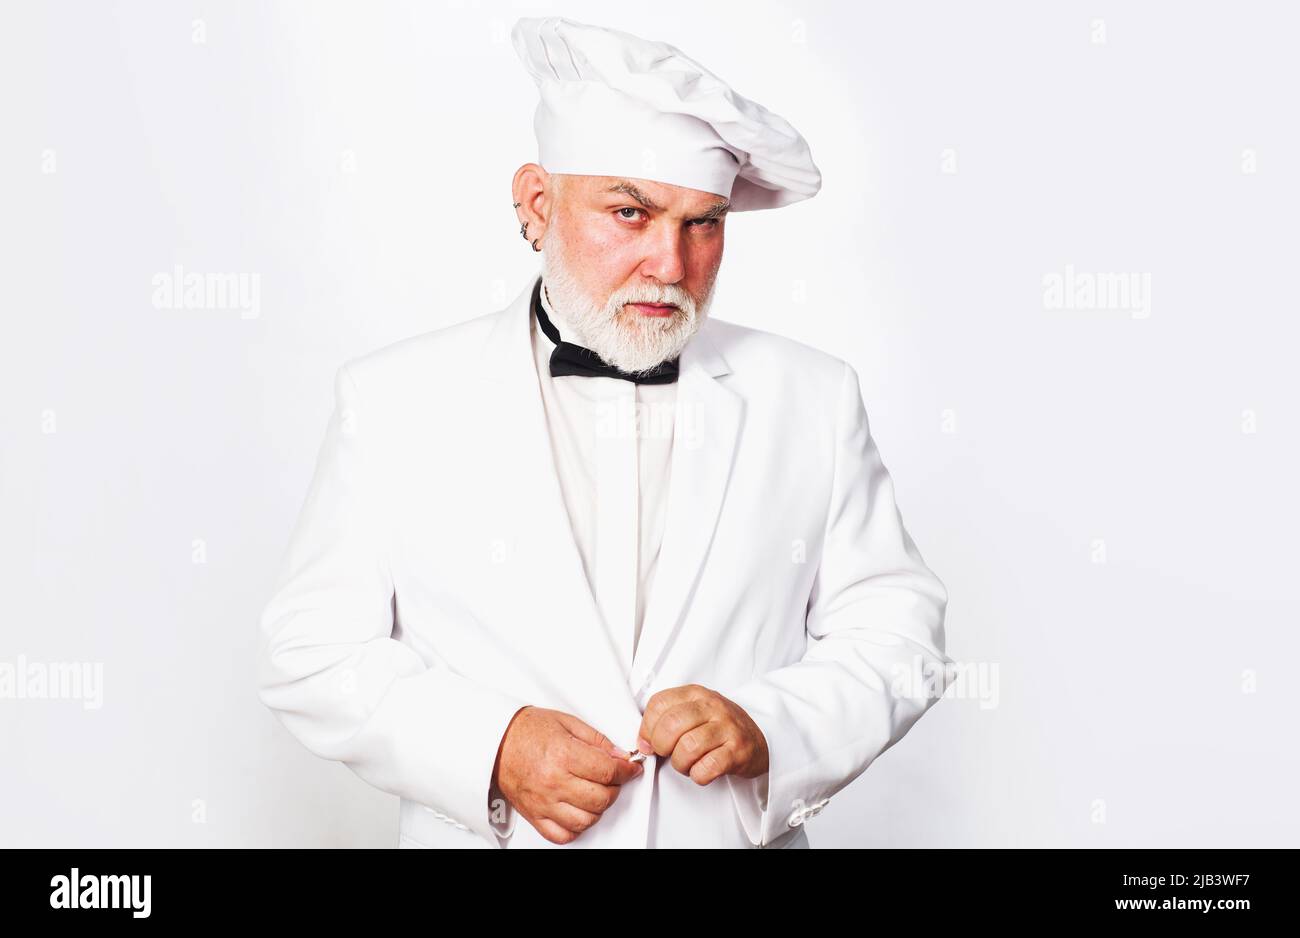 Serious bearded chef, cook or baker in white uniform and hat. Cooking. Kitchen advertising. Stock Photo